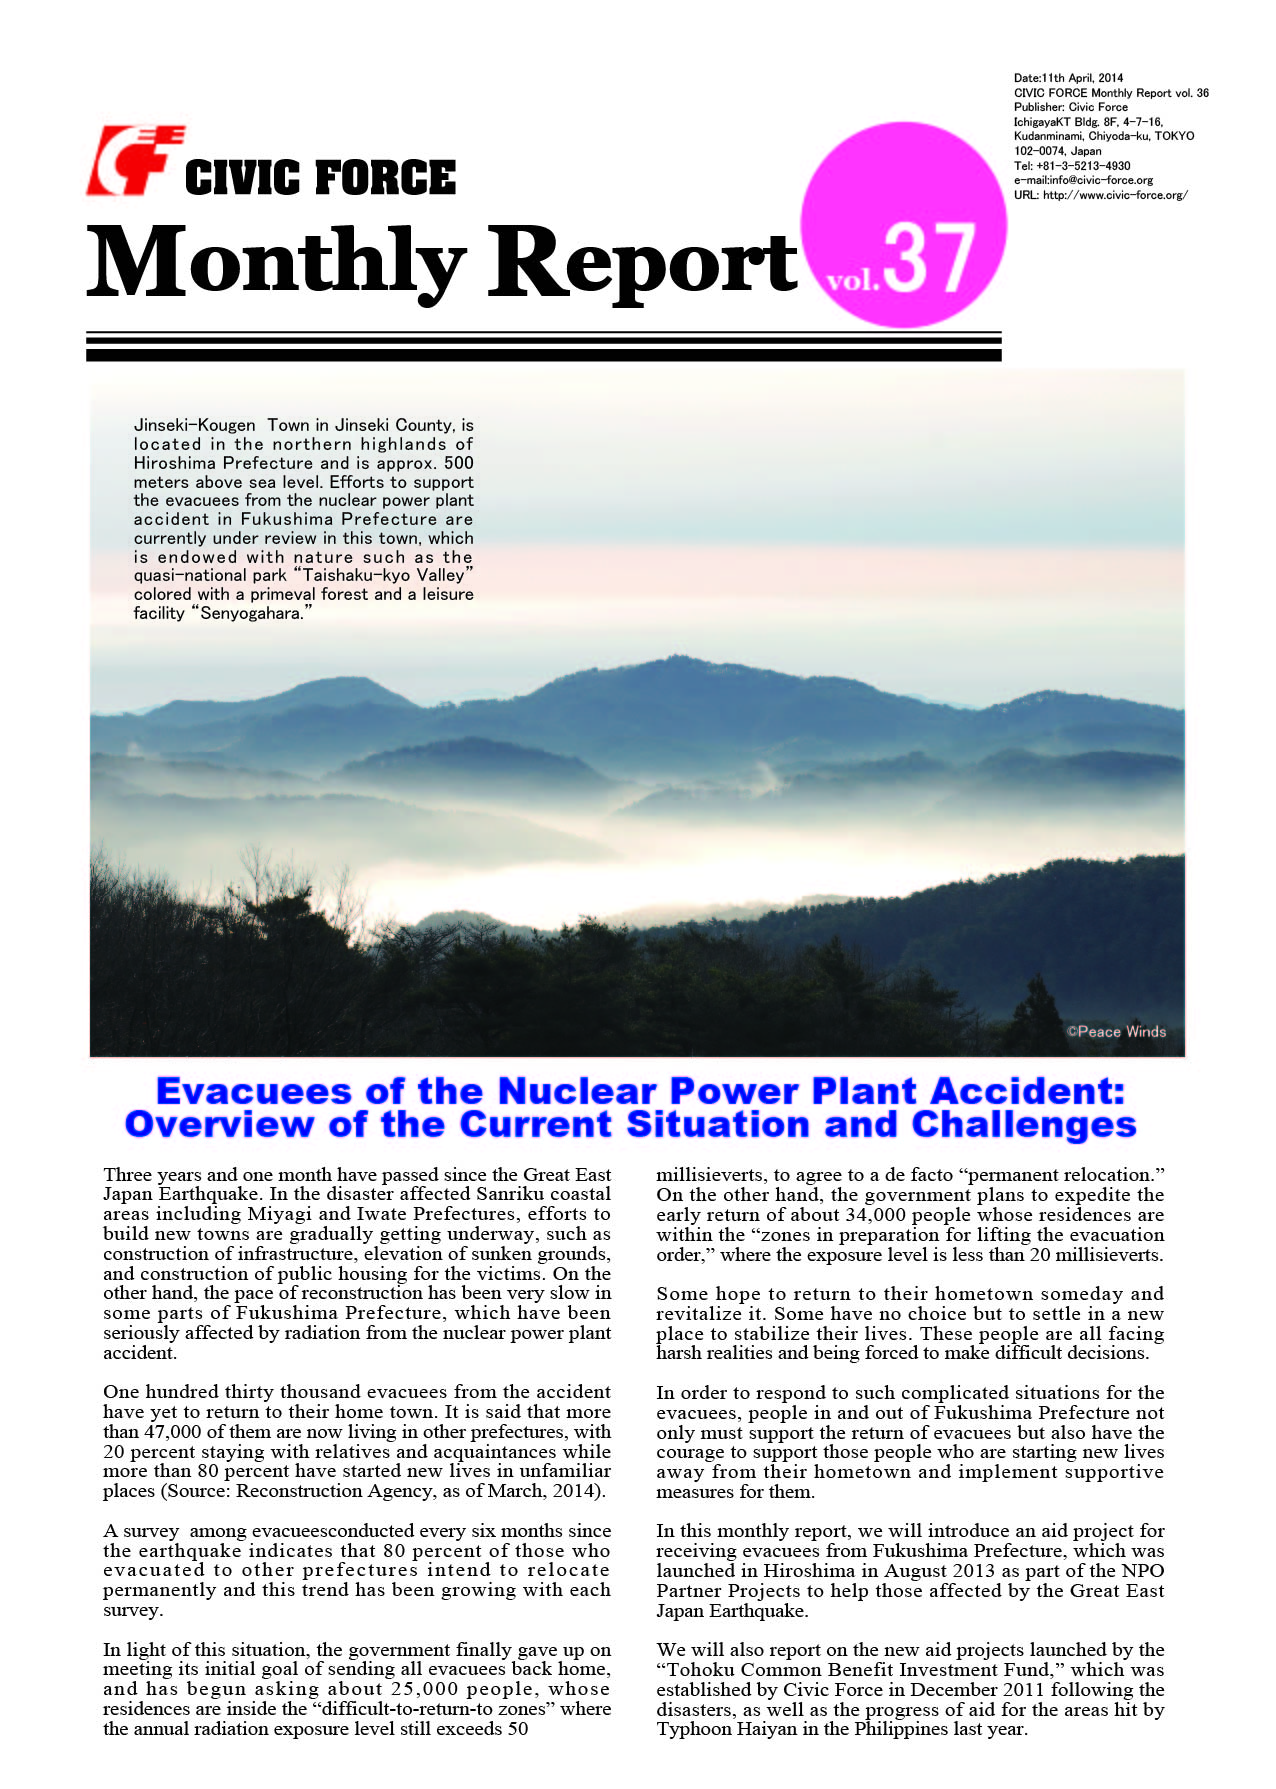 http://www.civic-force.org/english/news/docs/MonthlyReport%20vol.37.eng.pdf